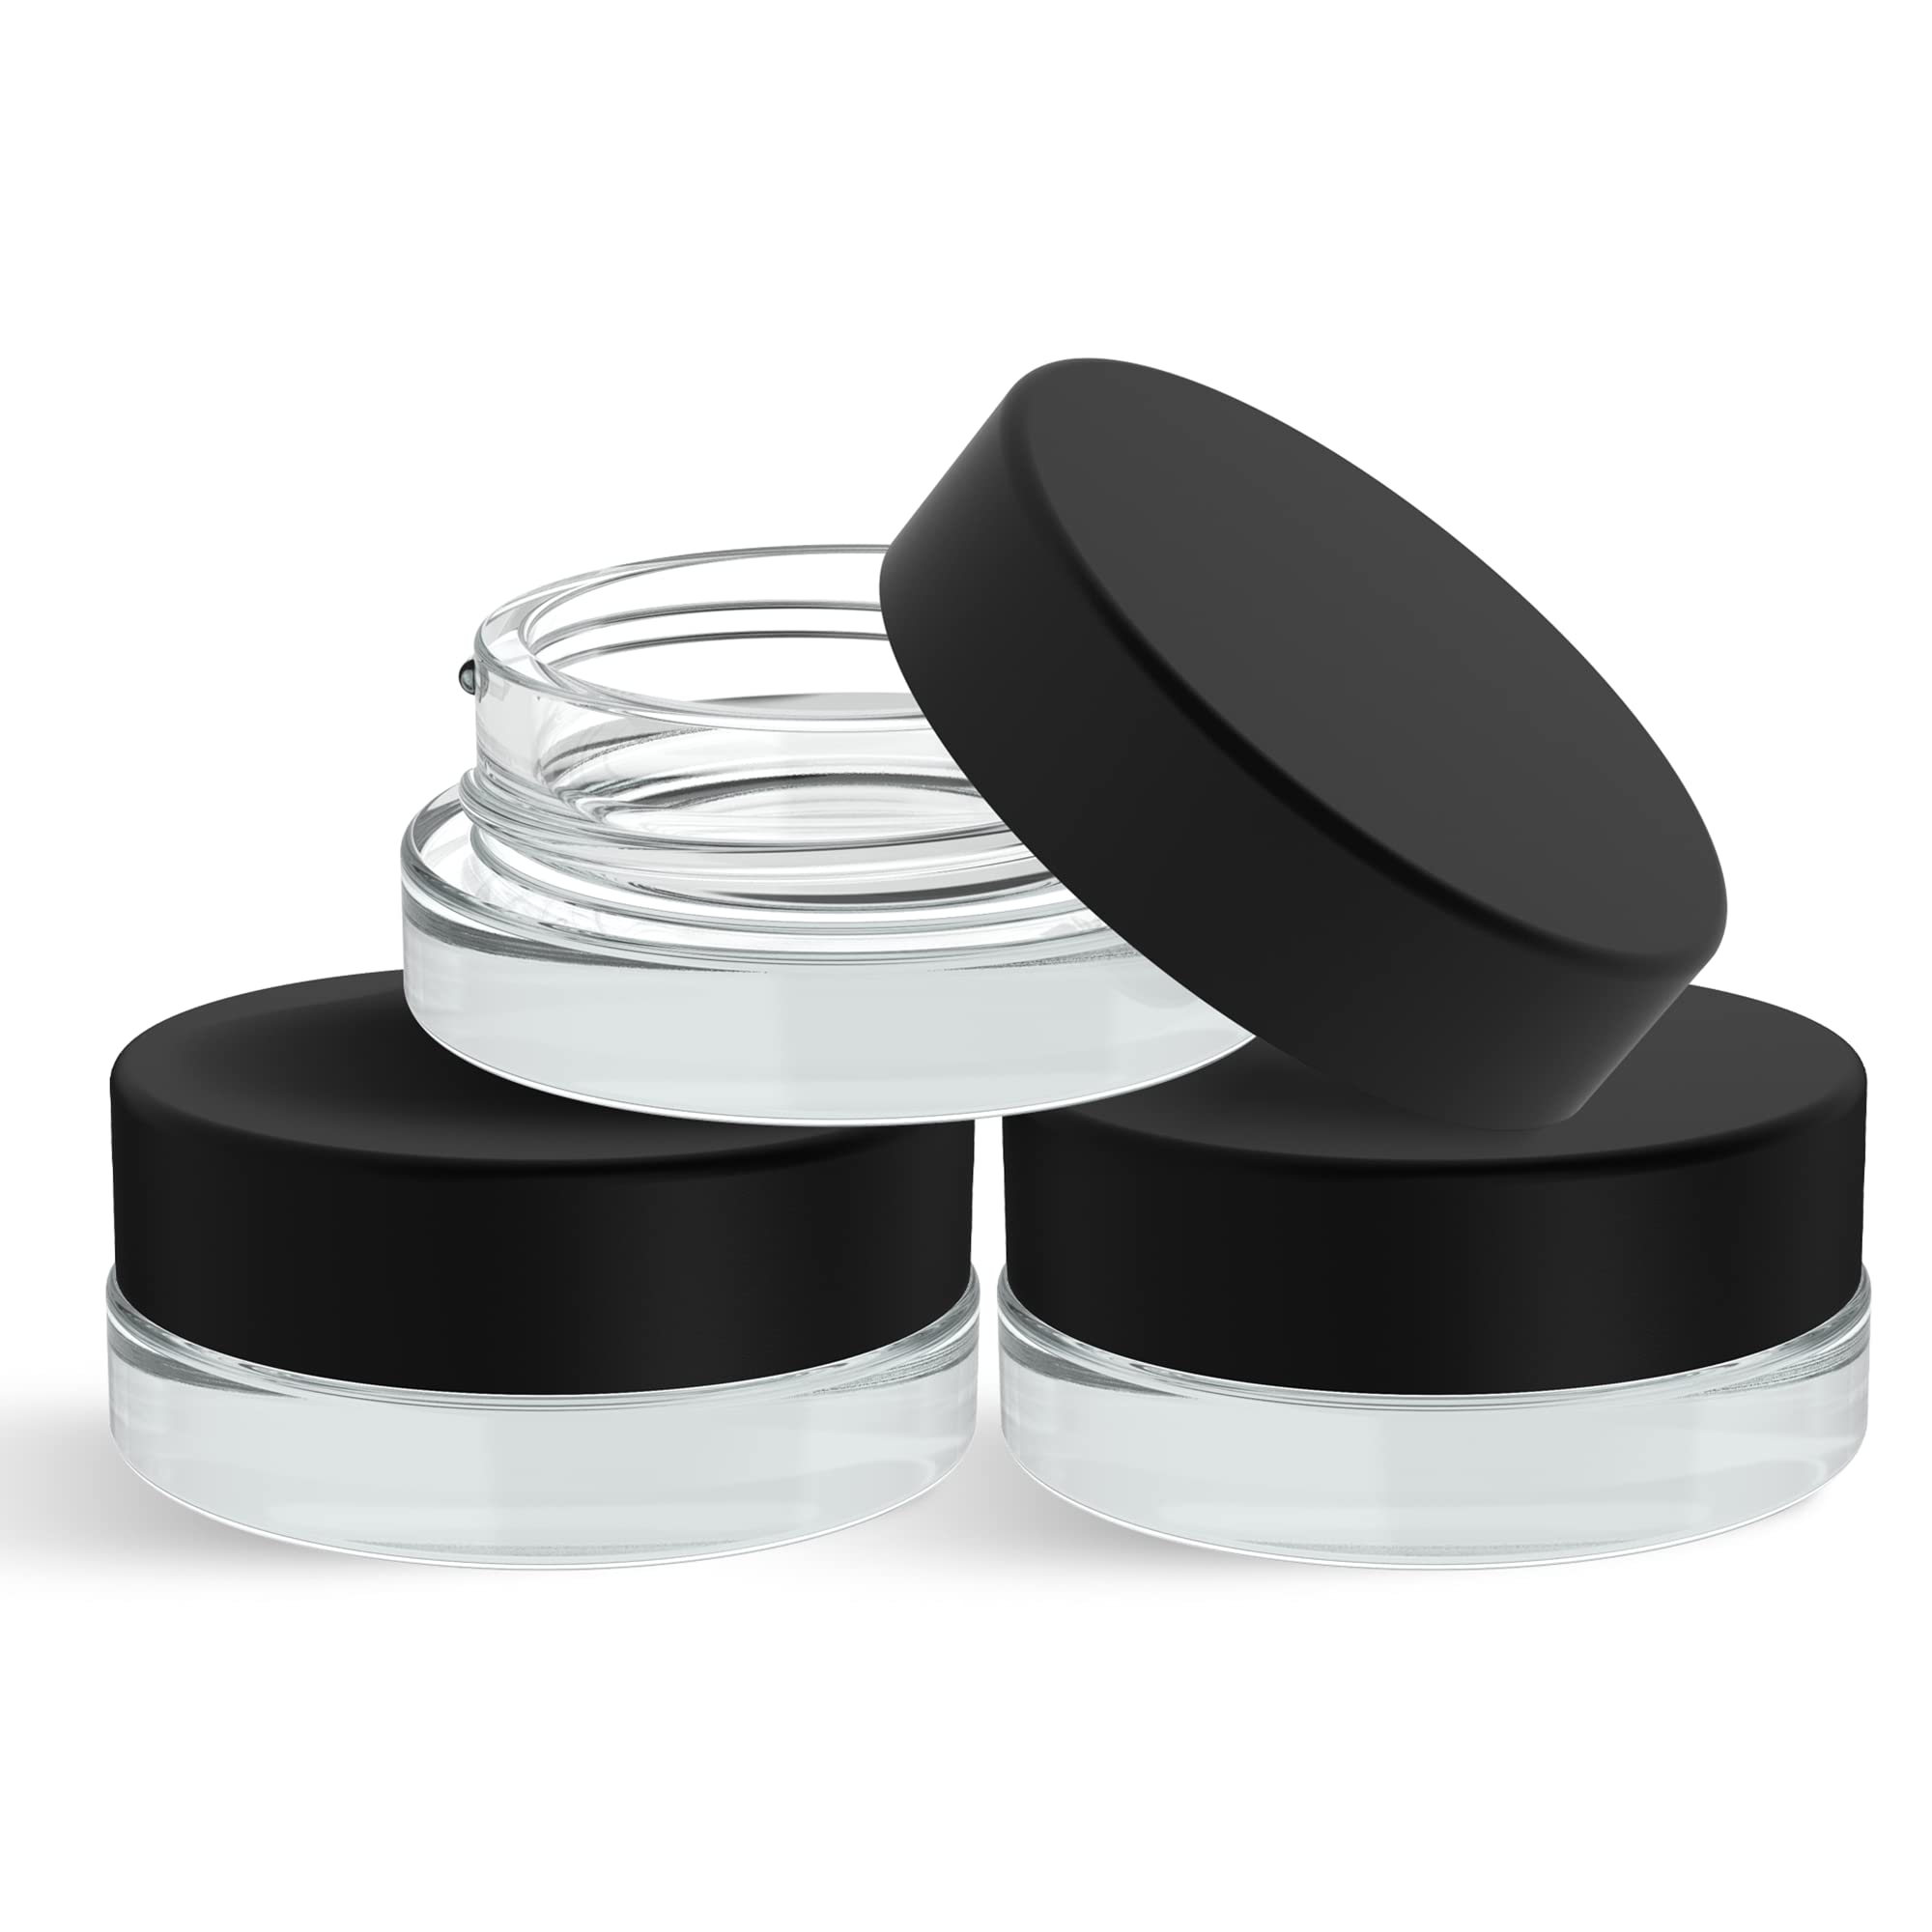 Concentrate Storage Solutions: Why 7ml Glass Jars are the Perfect Choice - Oil Slick